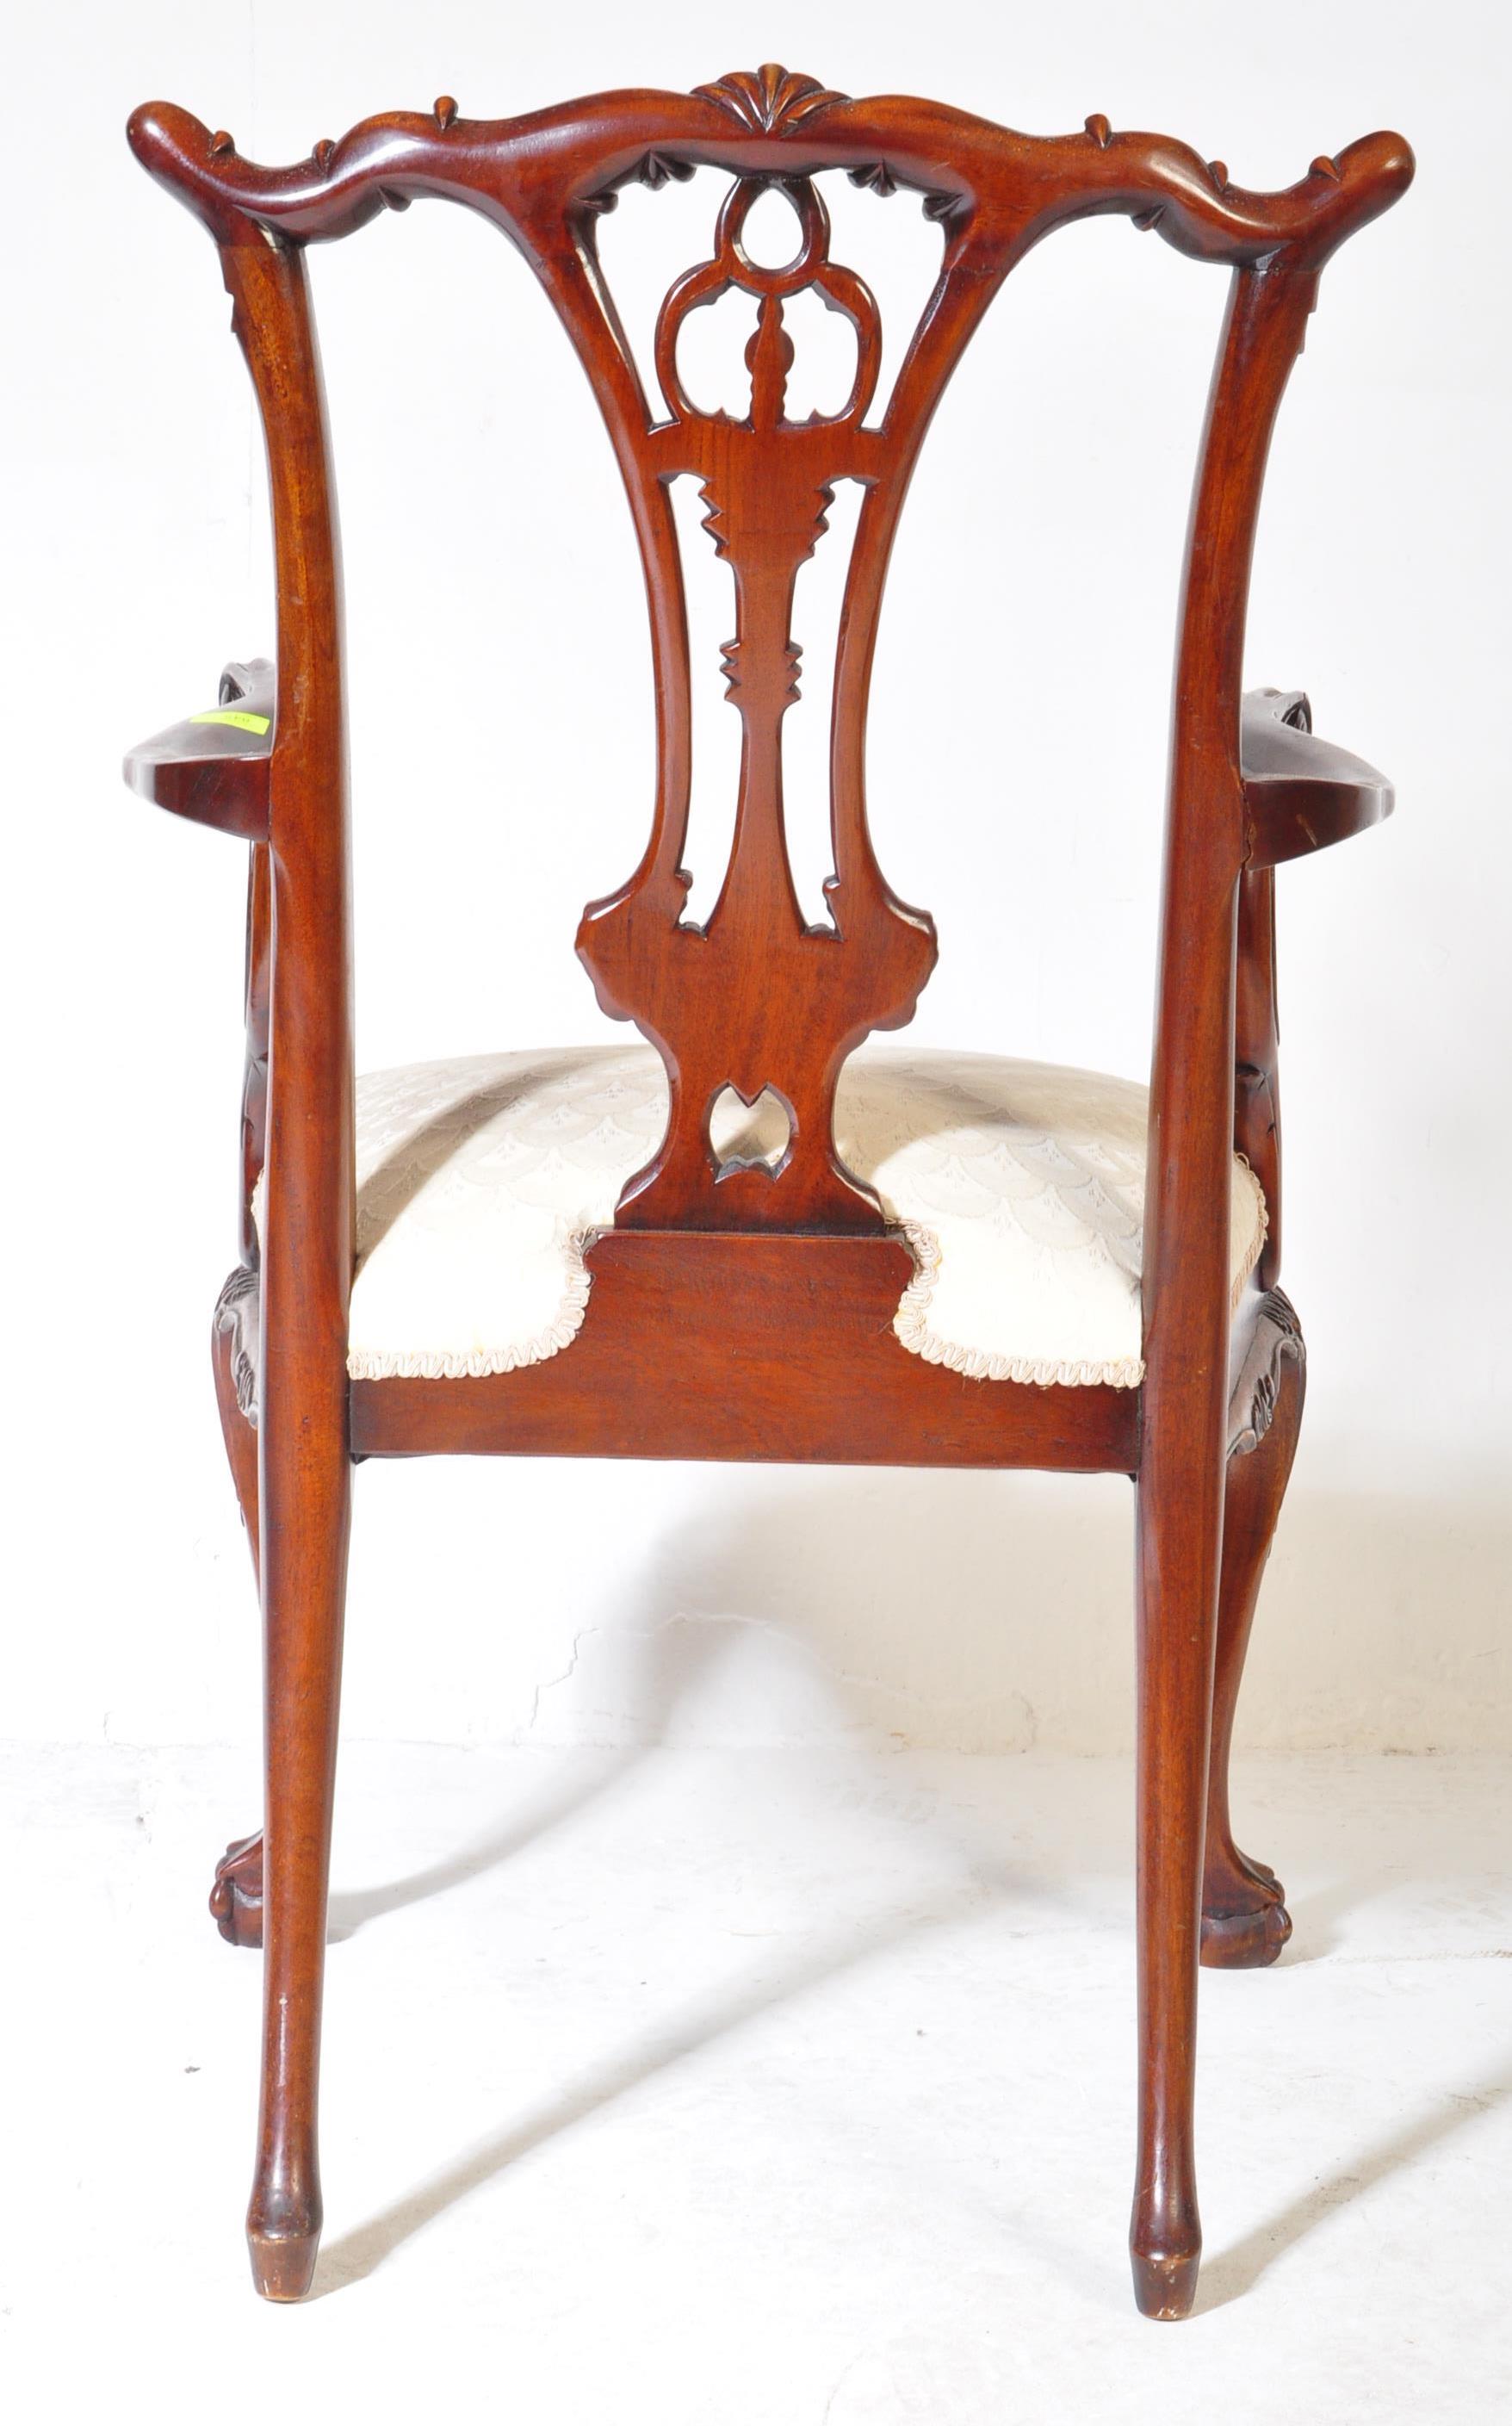 EARLY 20TH CENTURY MAHOGANY CHIPPENDALE STYLE DESK CHAIR - Image 4 of 5